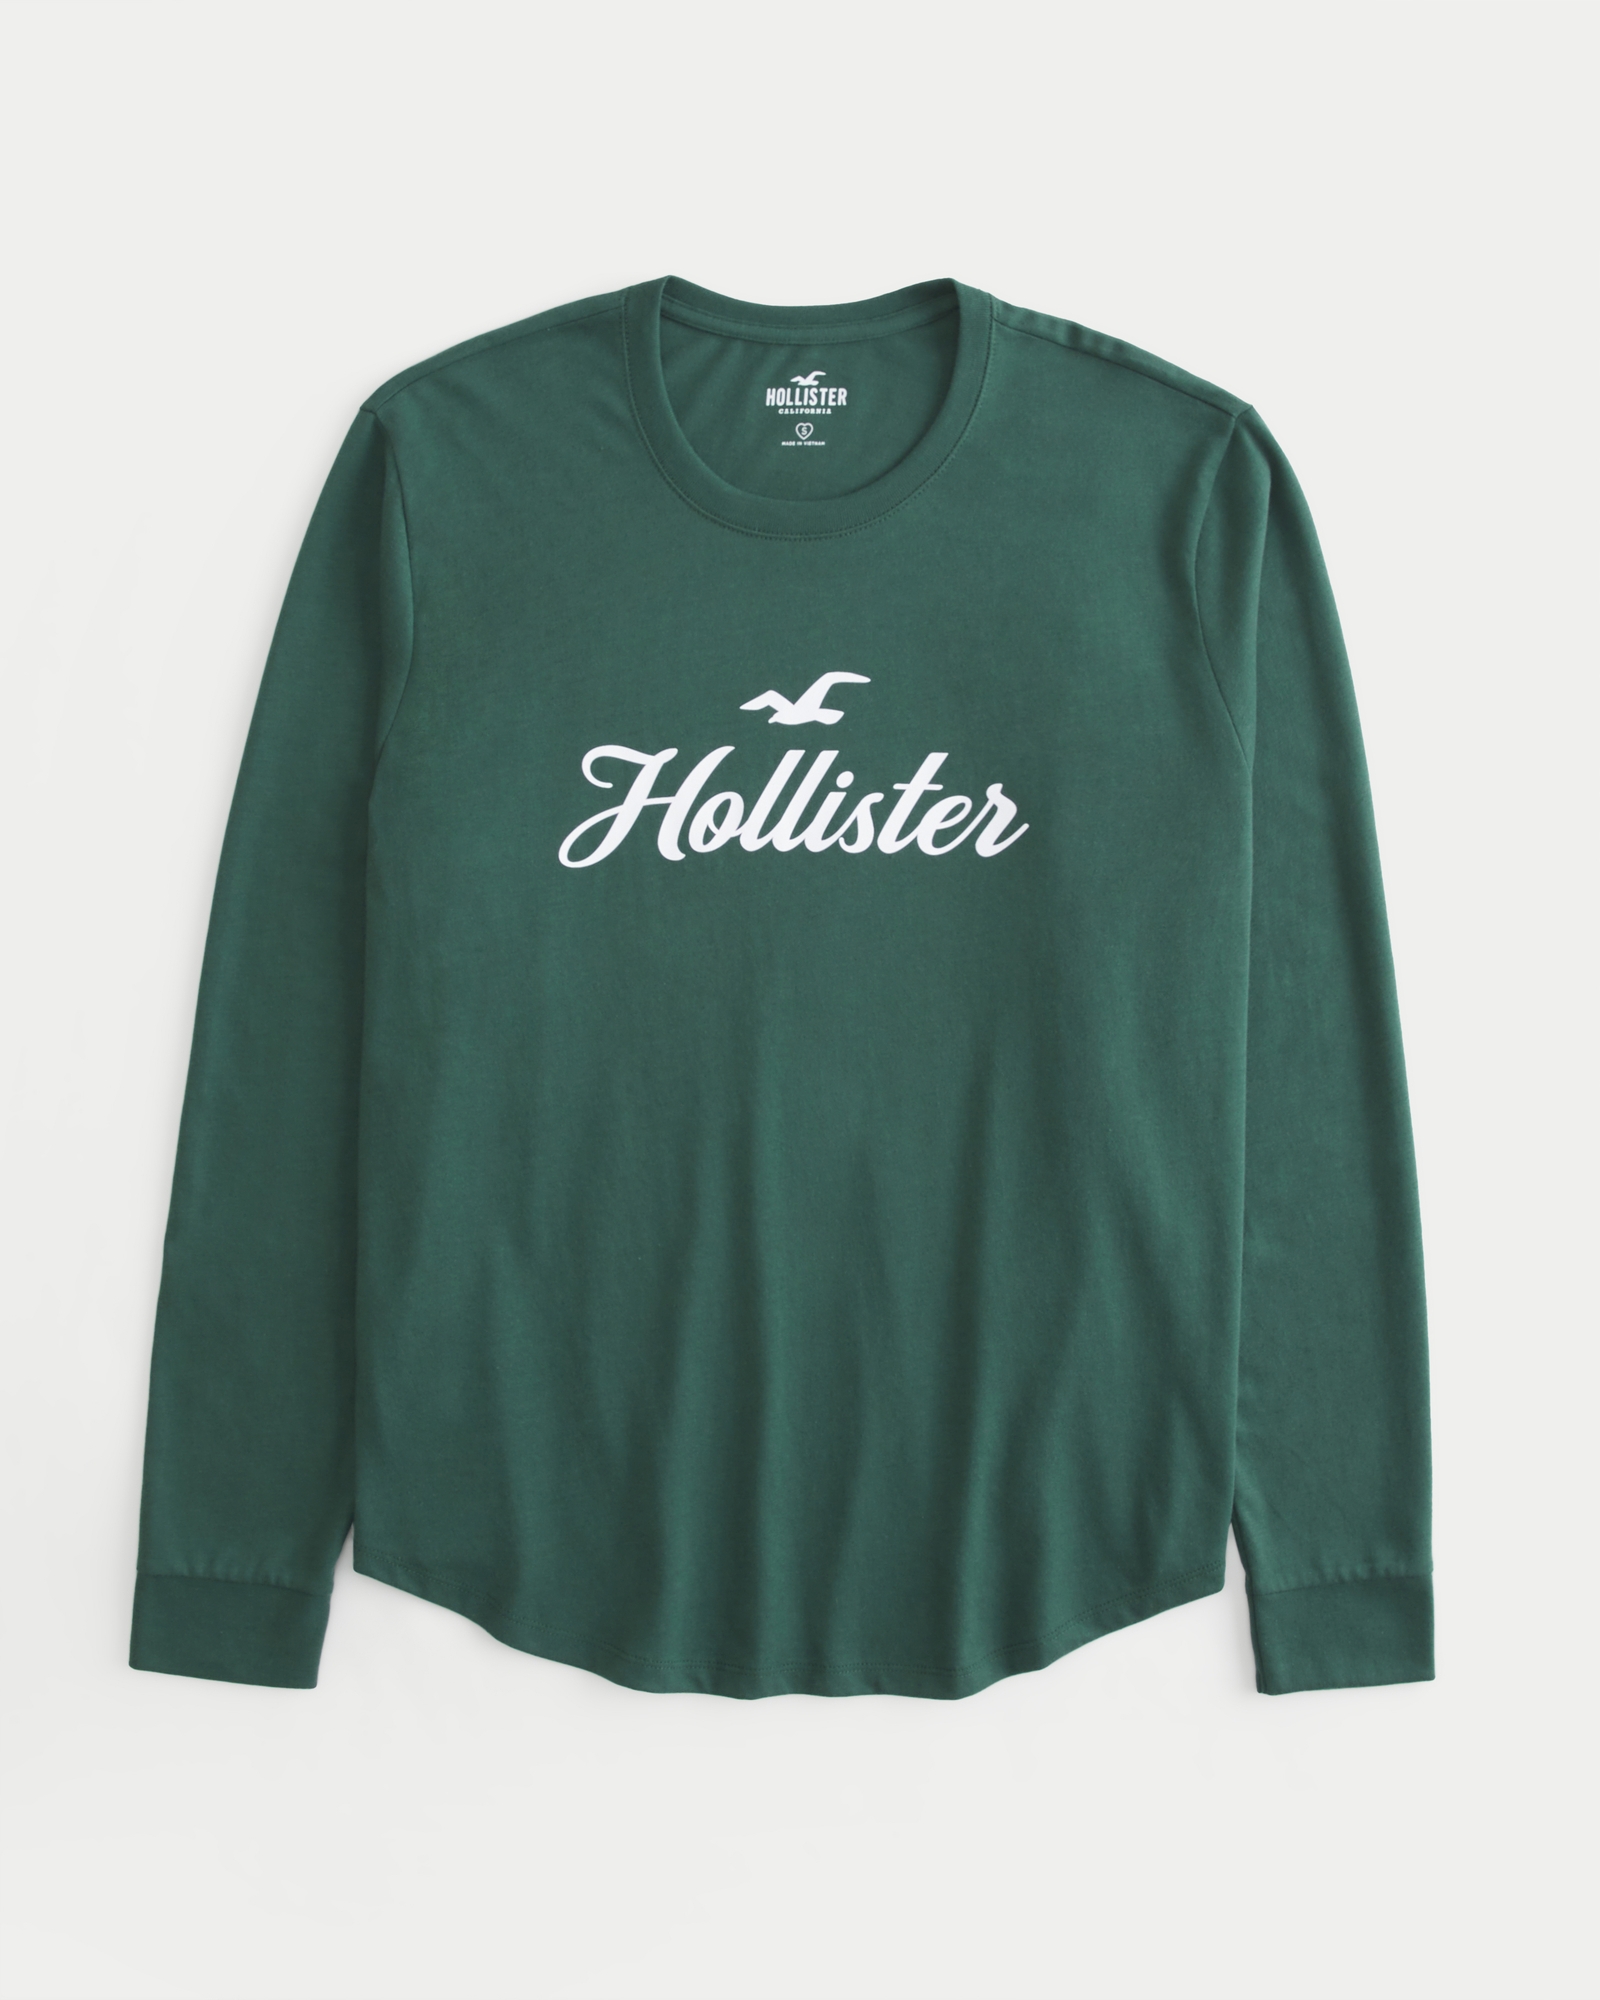 Hollister 3 pack icon logo long sleeve tops in white/gray/navy